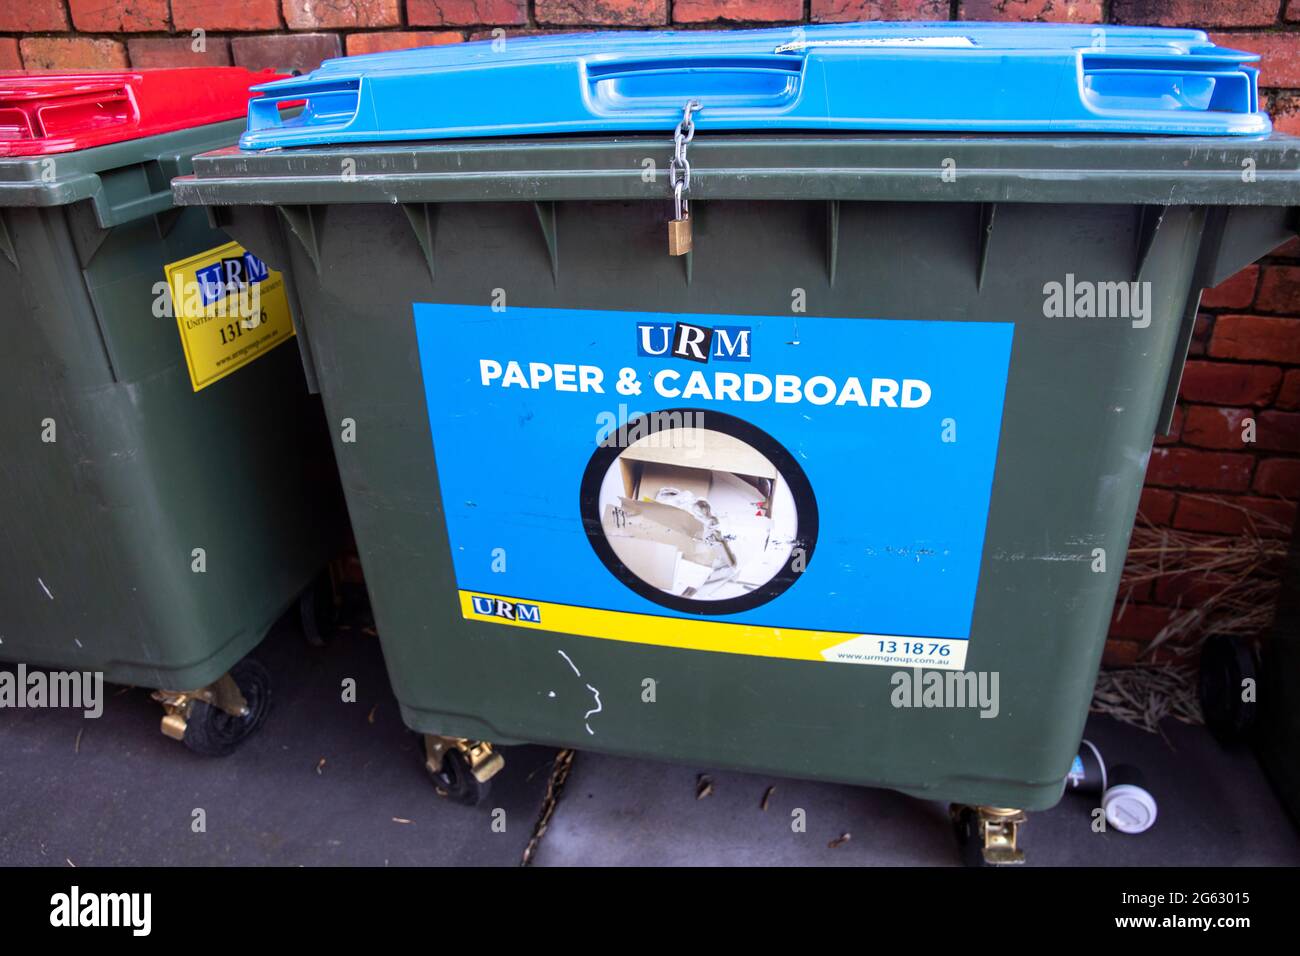 Paper and cardboard recycling bin in Sydney,Australia awaiting council collection Stock Photo